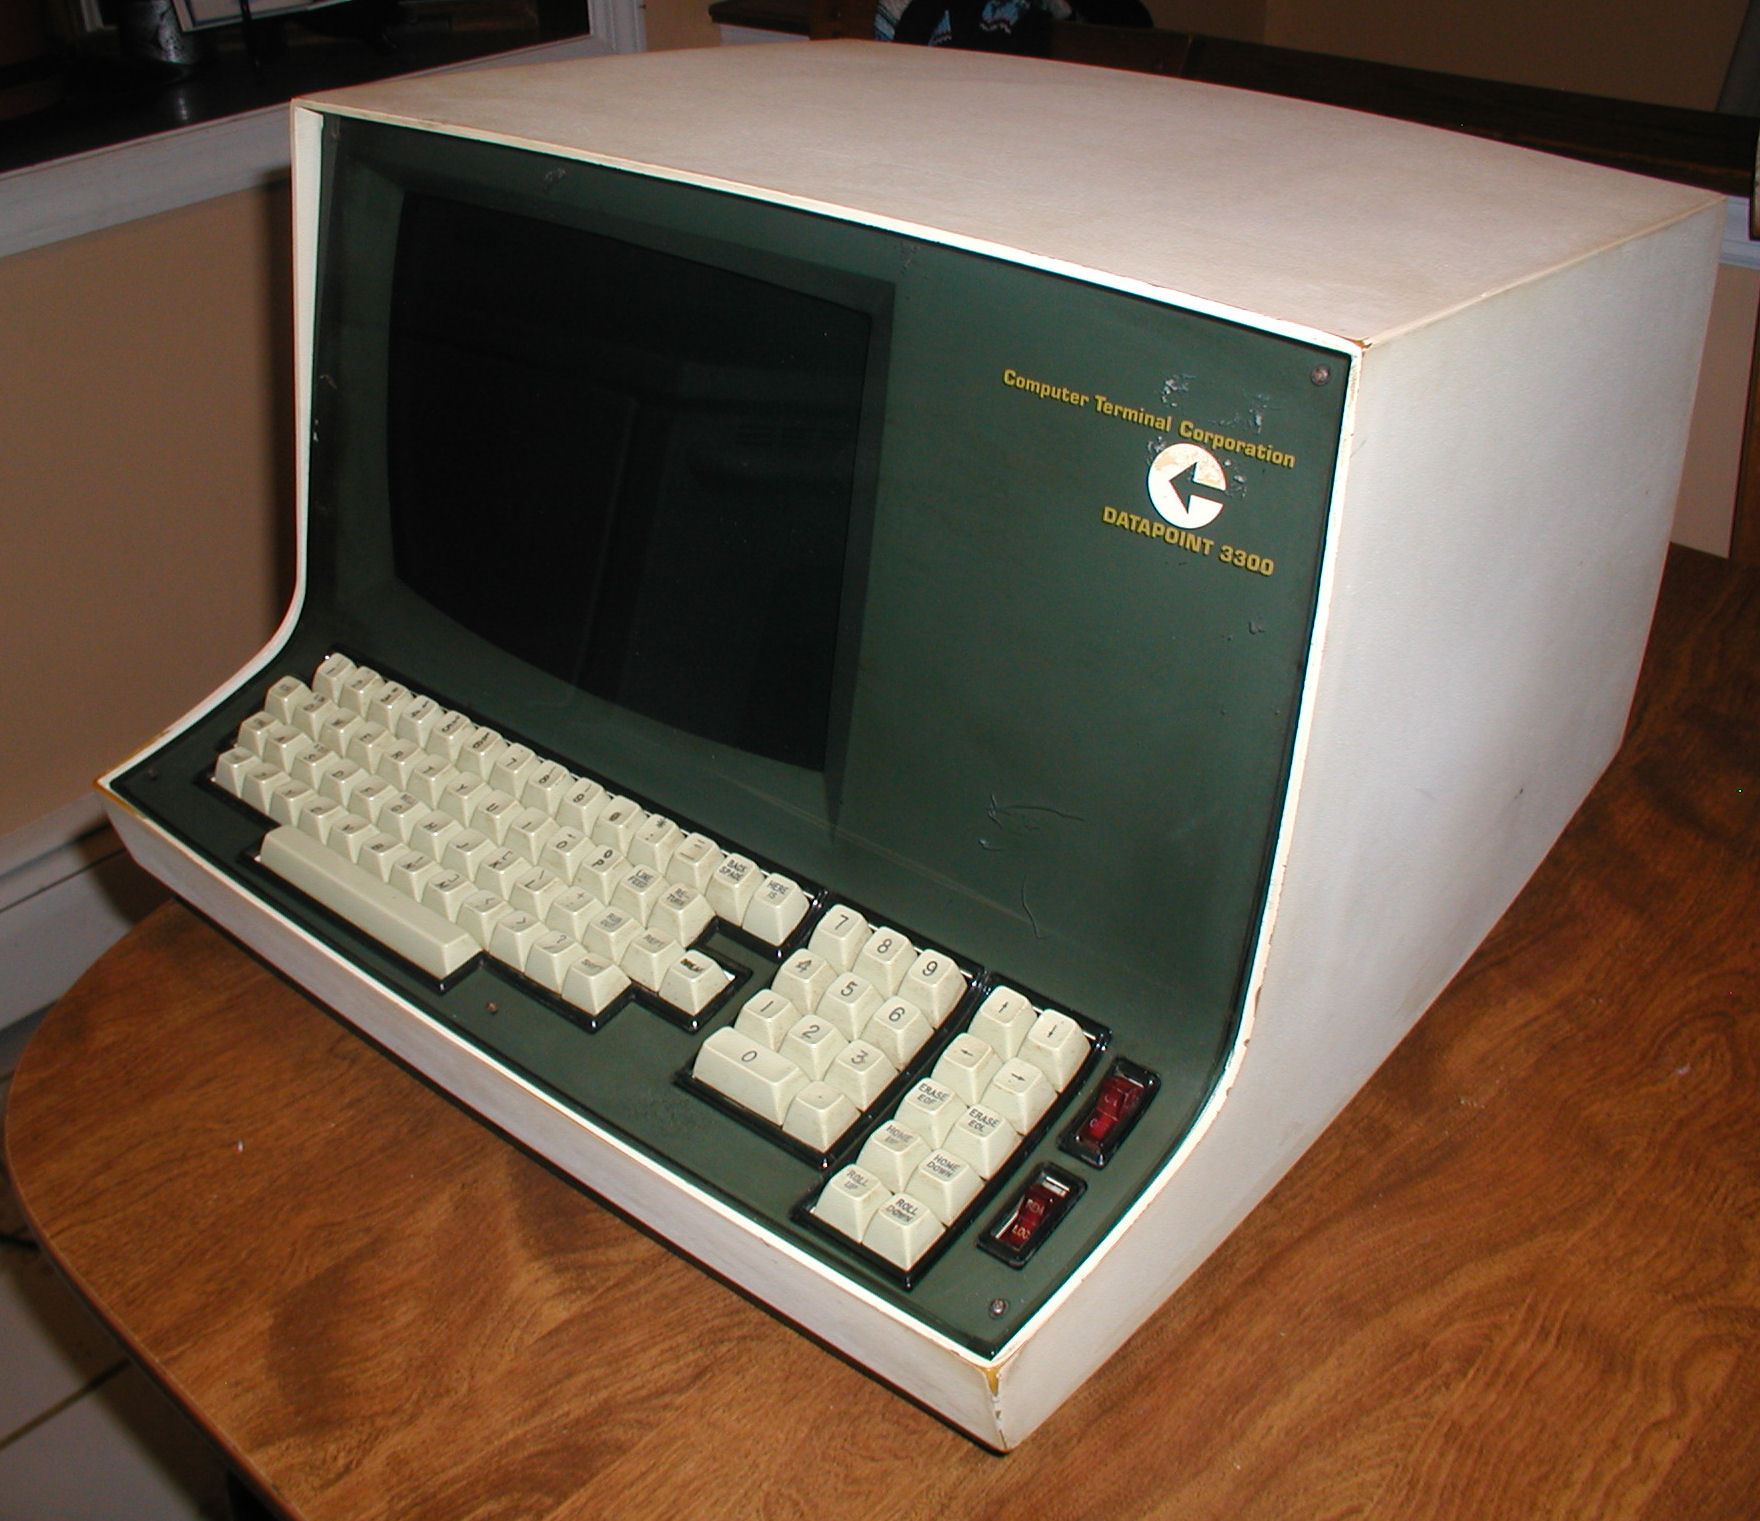 Computer Terminal Corp DataPoint 3300